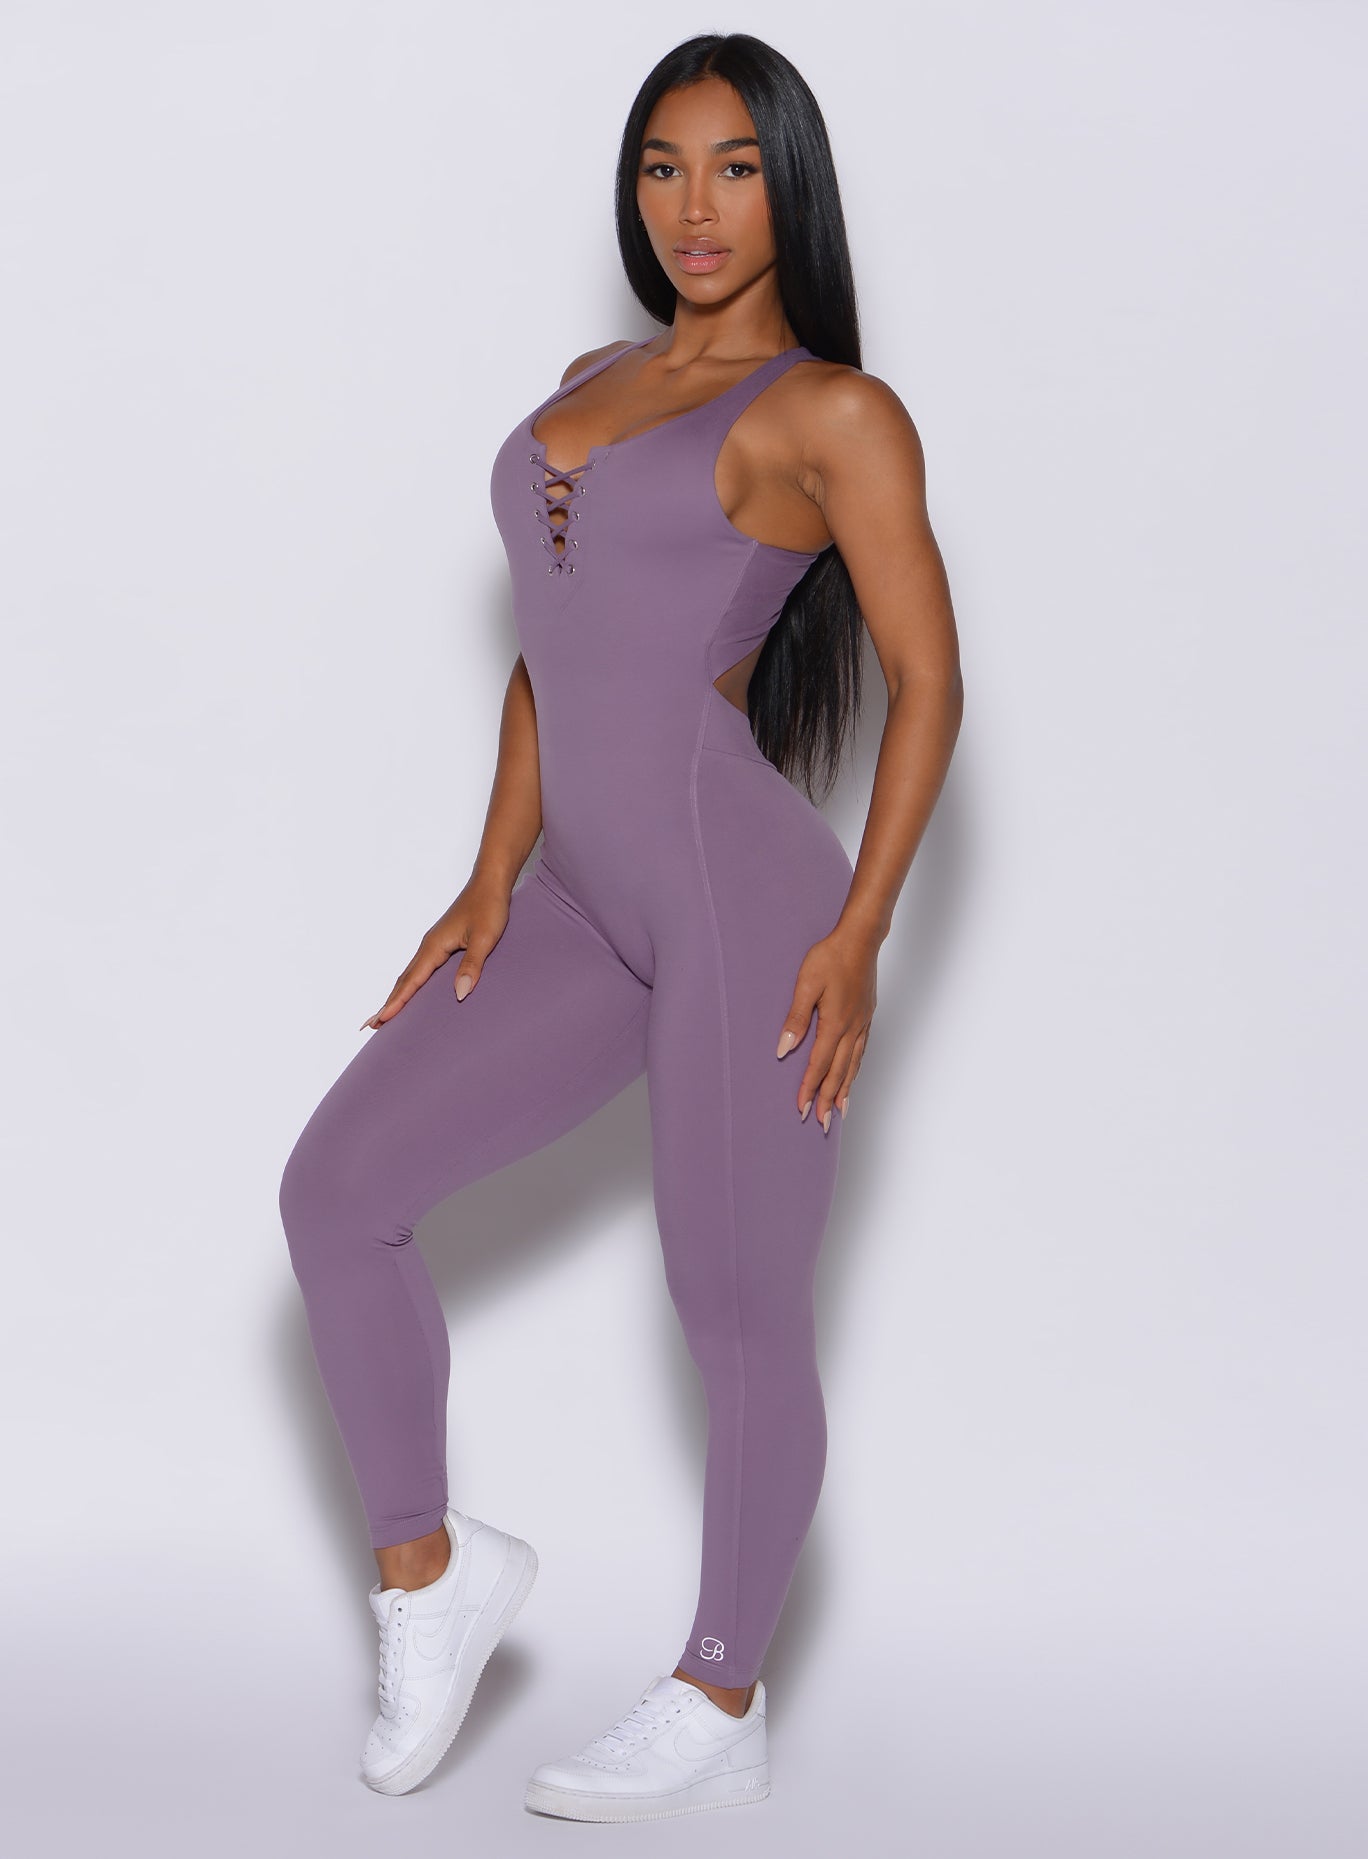 left side  profile view of a model angled slightly to her left wearing our laced bodysuit in Violet Frost color